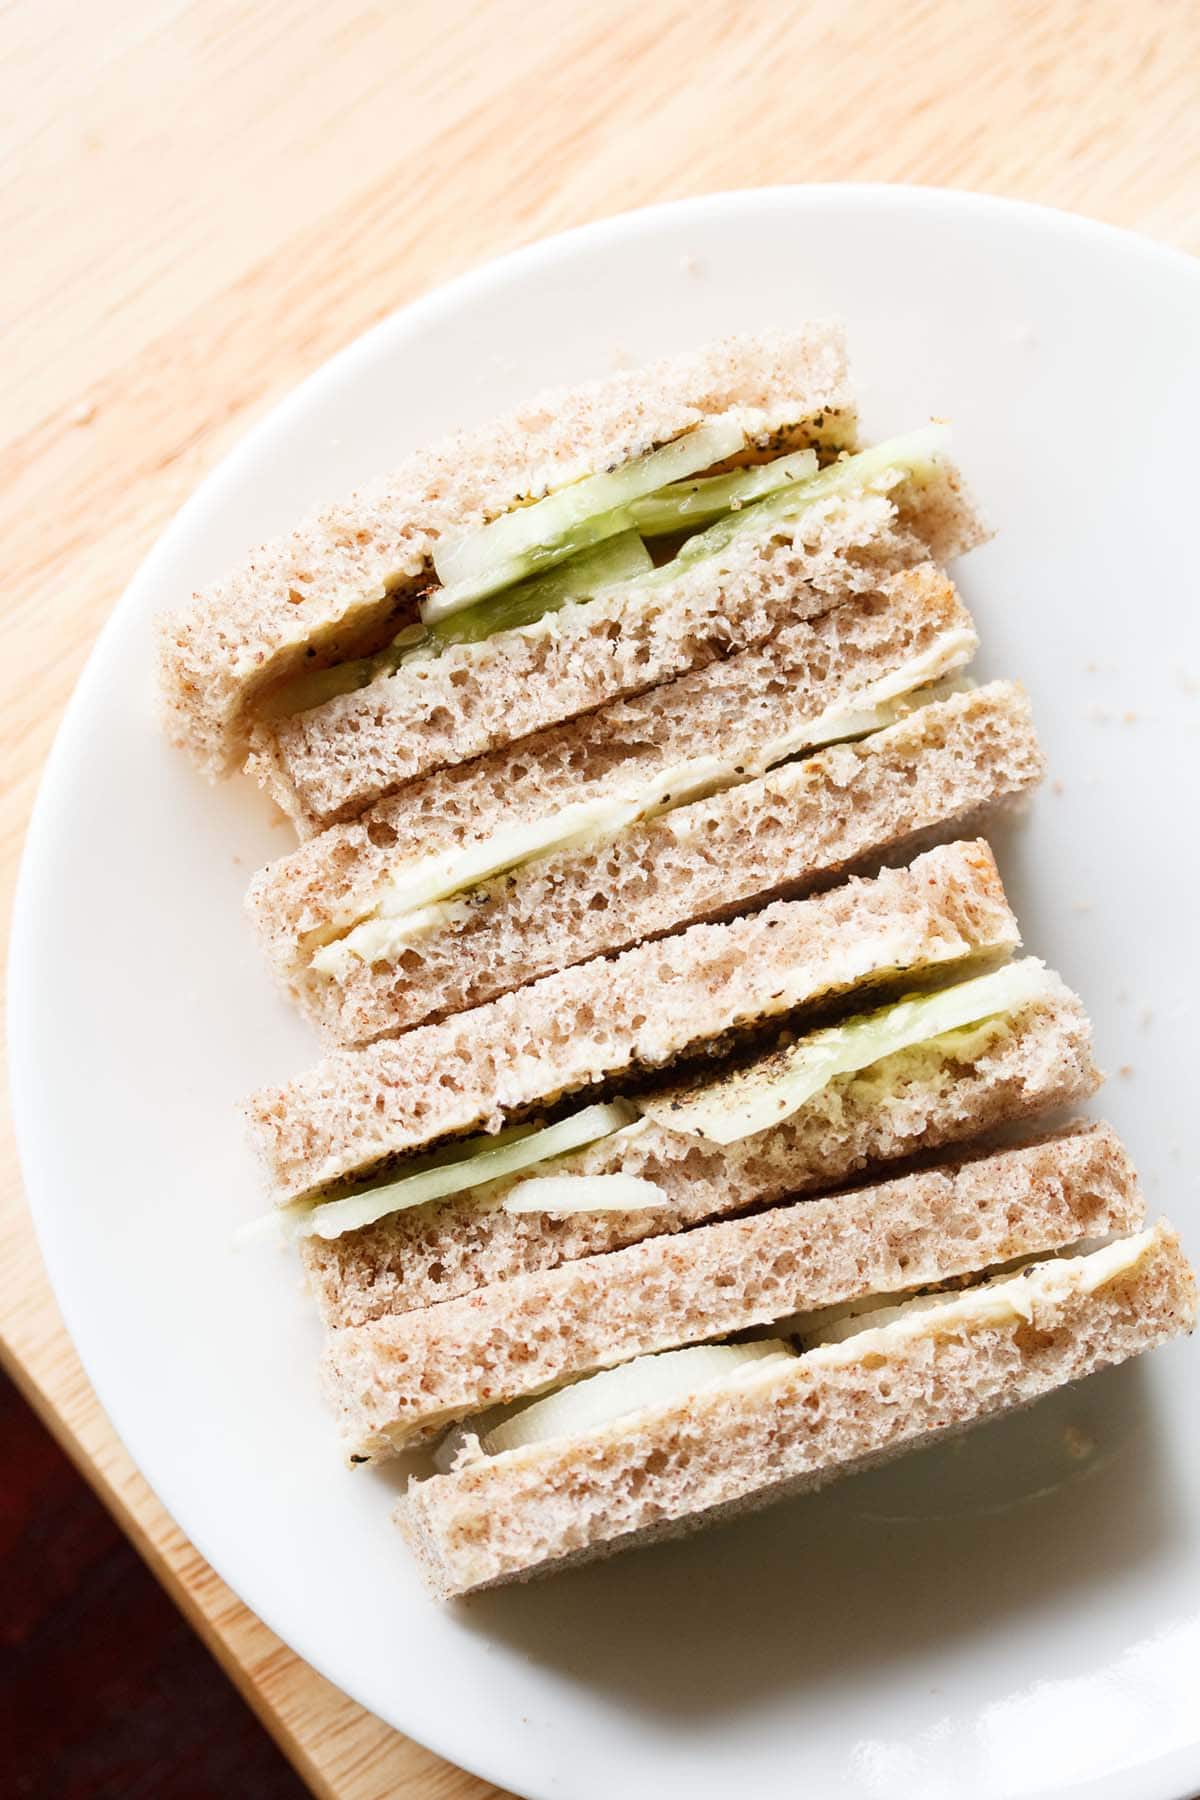 close up shot of stacked cucumber sandwiches with the visible layers of cucumber and bread placed on a white plate.